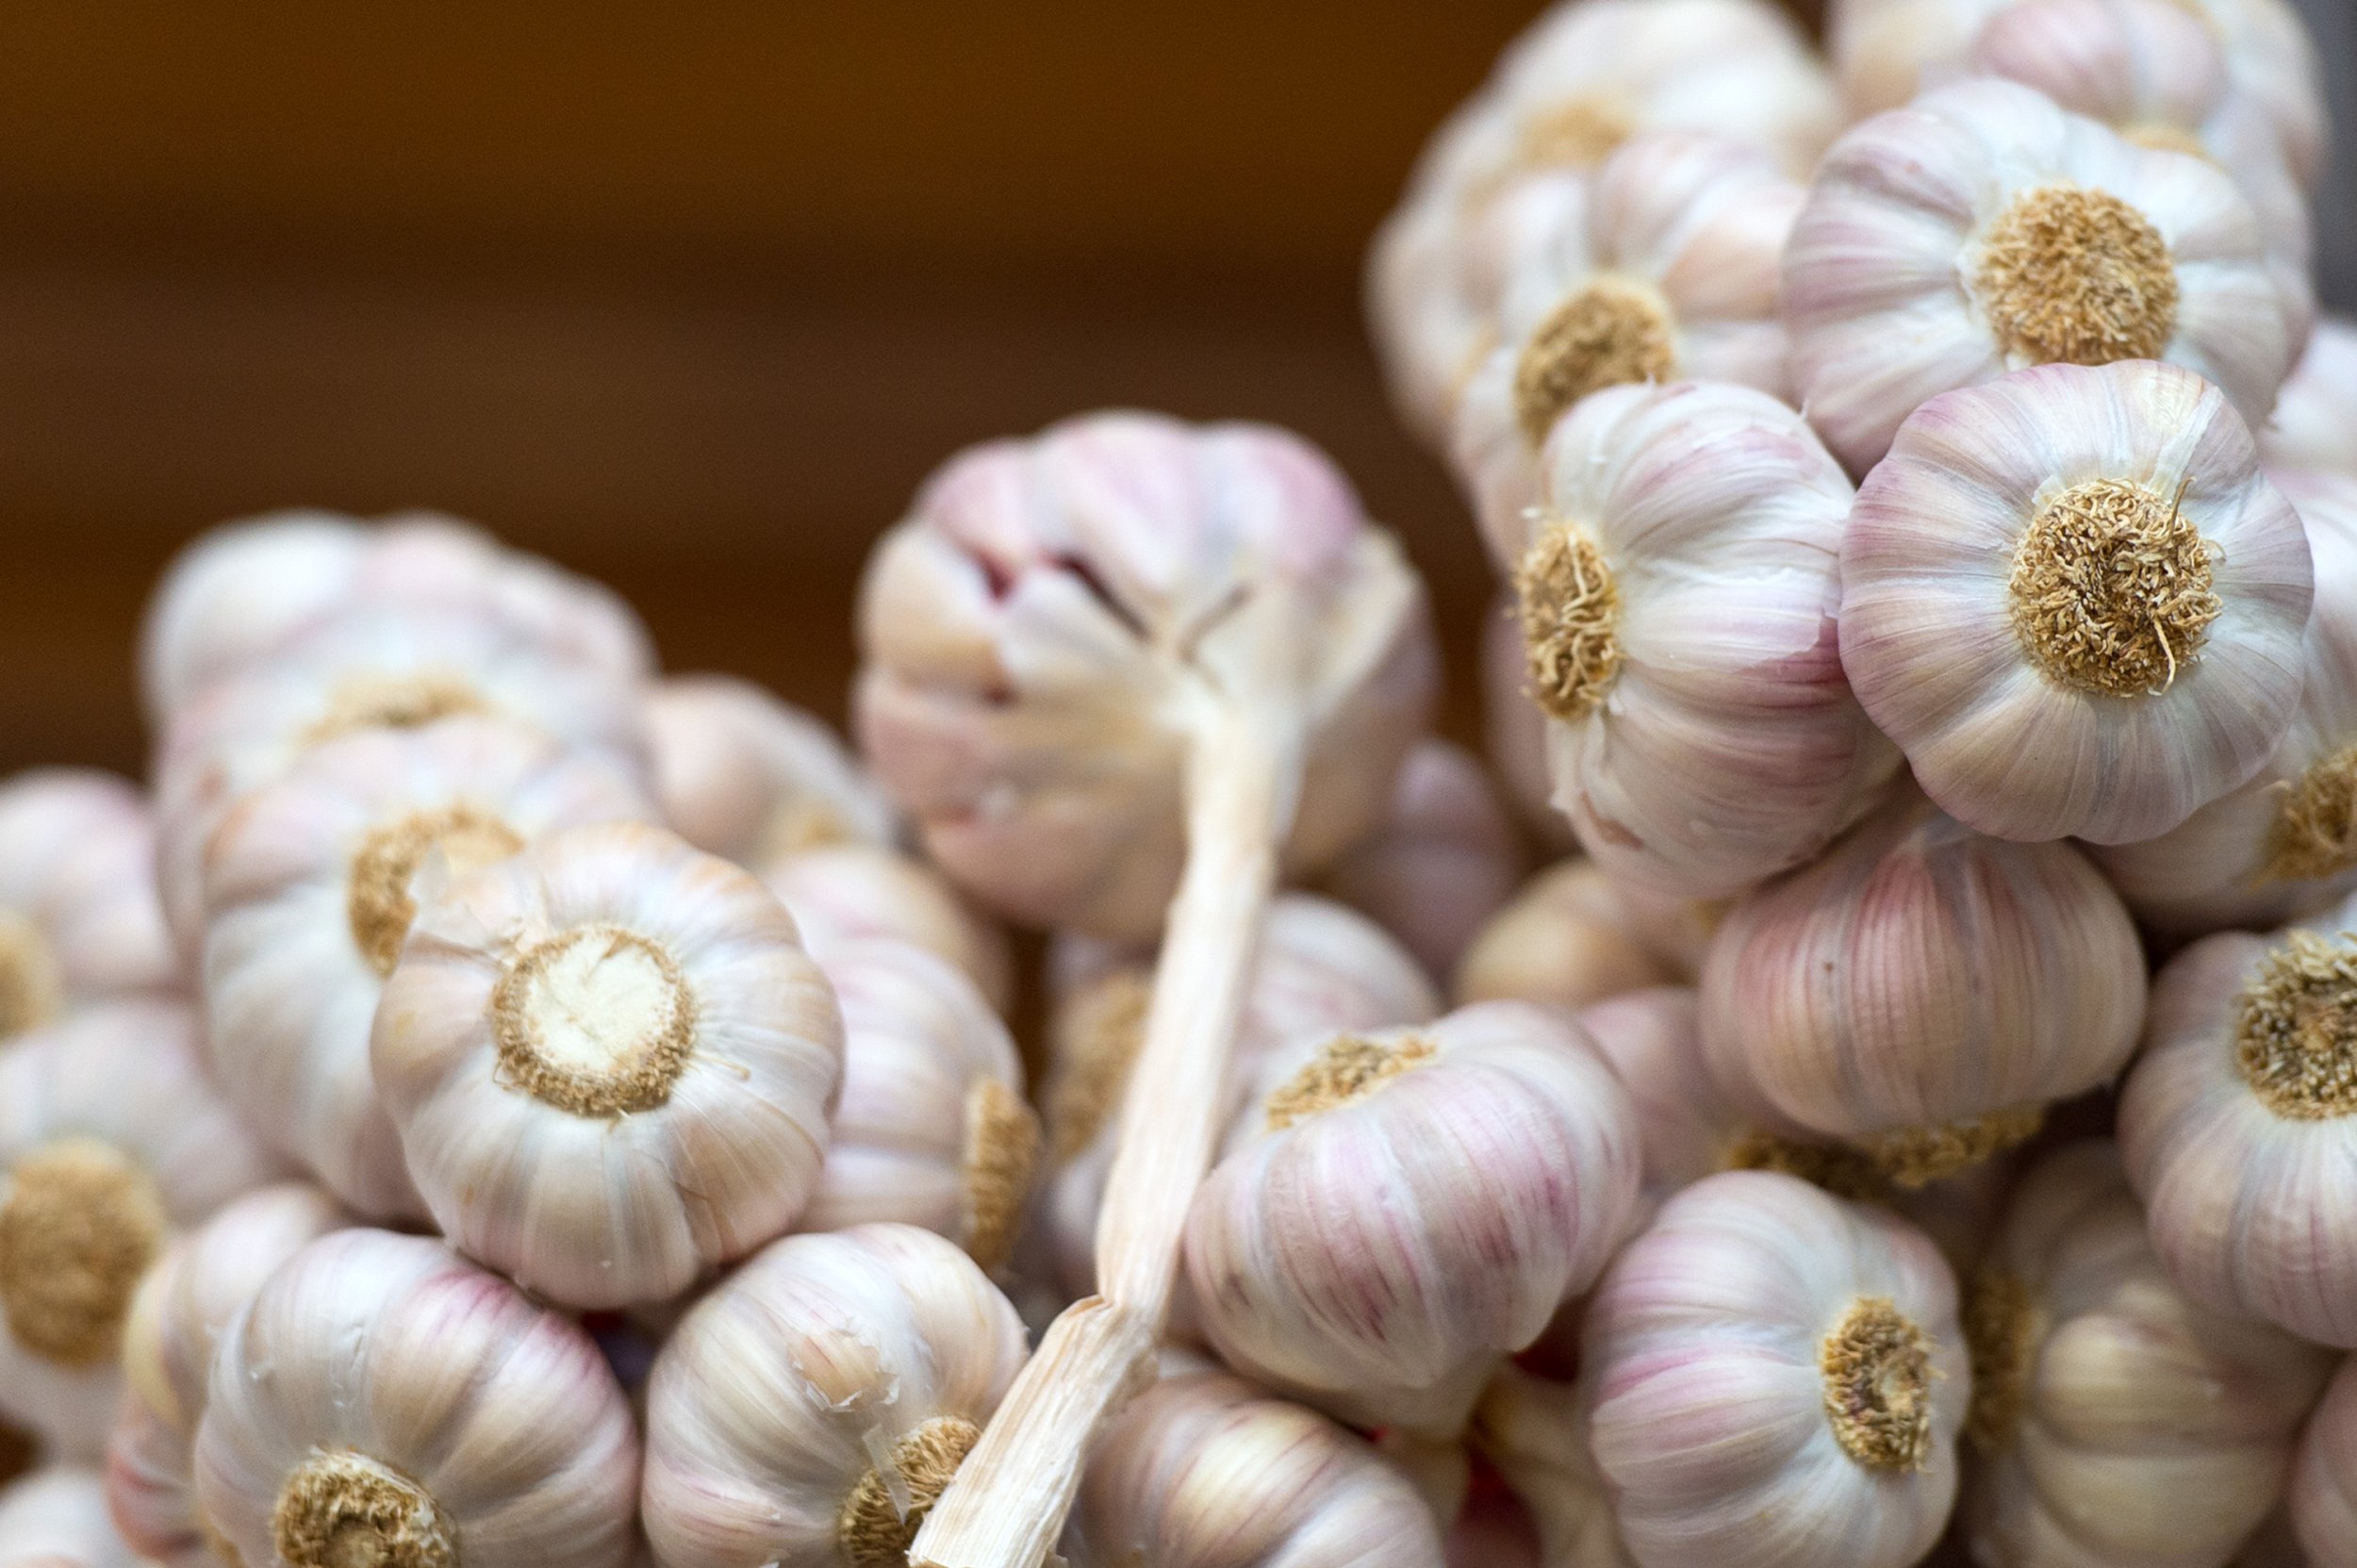 Eating Garlic Can Reduce The Risk Of Colorectal Cancer, Study Suggests